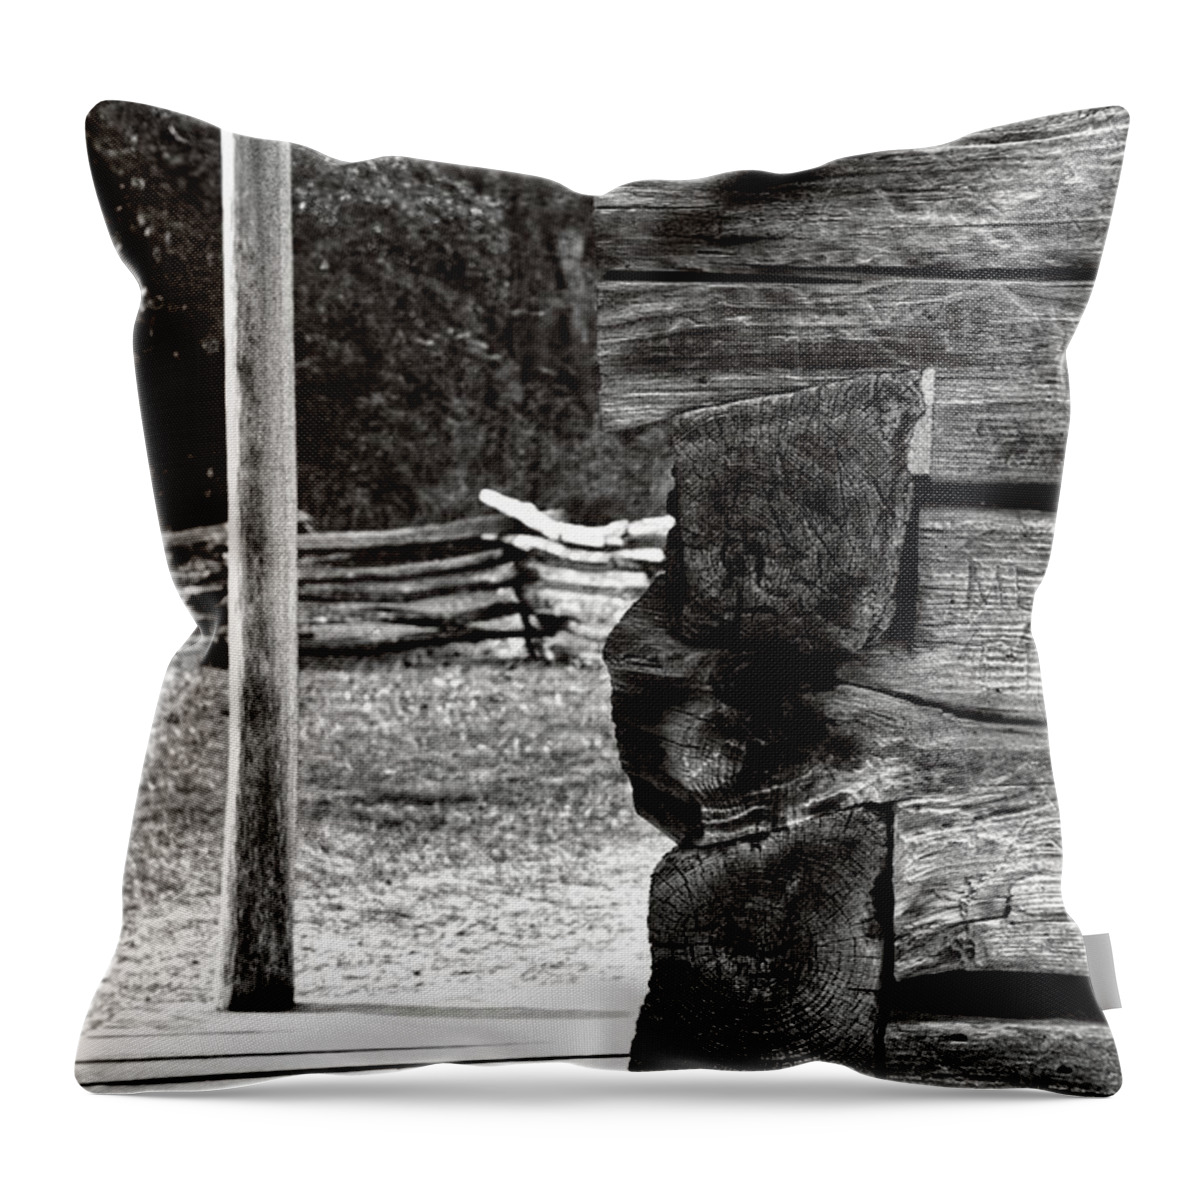 Monotone Throw Pillow featuring the photograph Black And White Log Cabin 2 by Phil Perkins